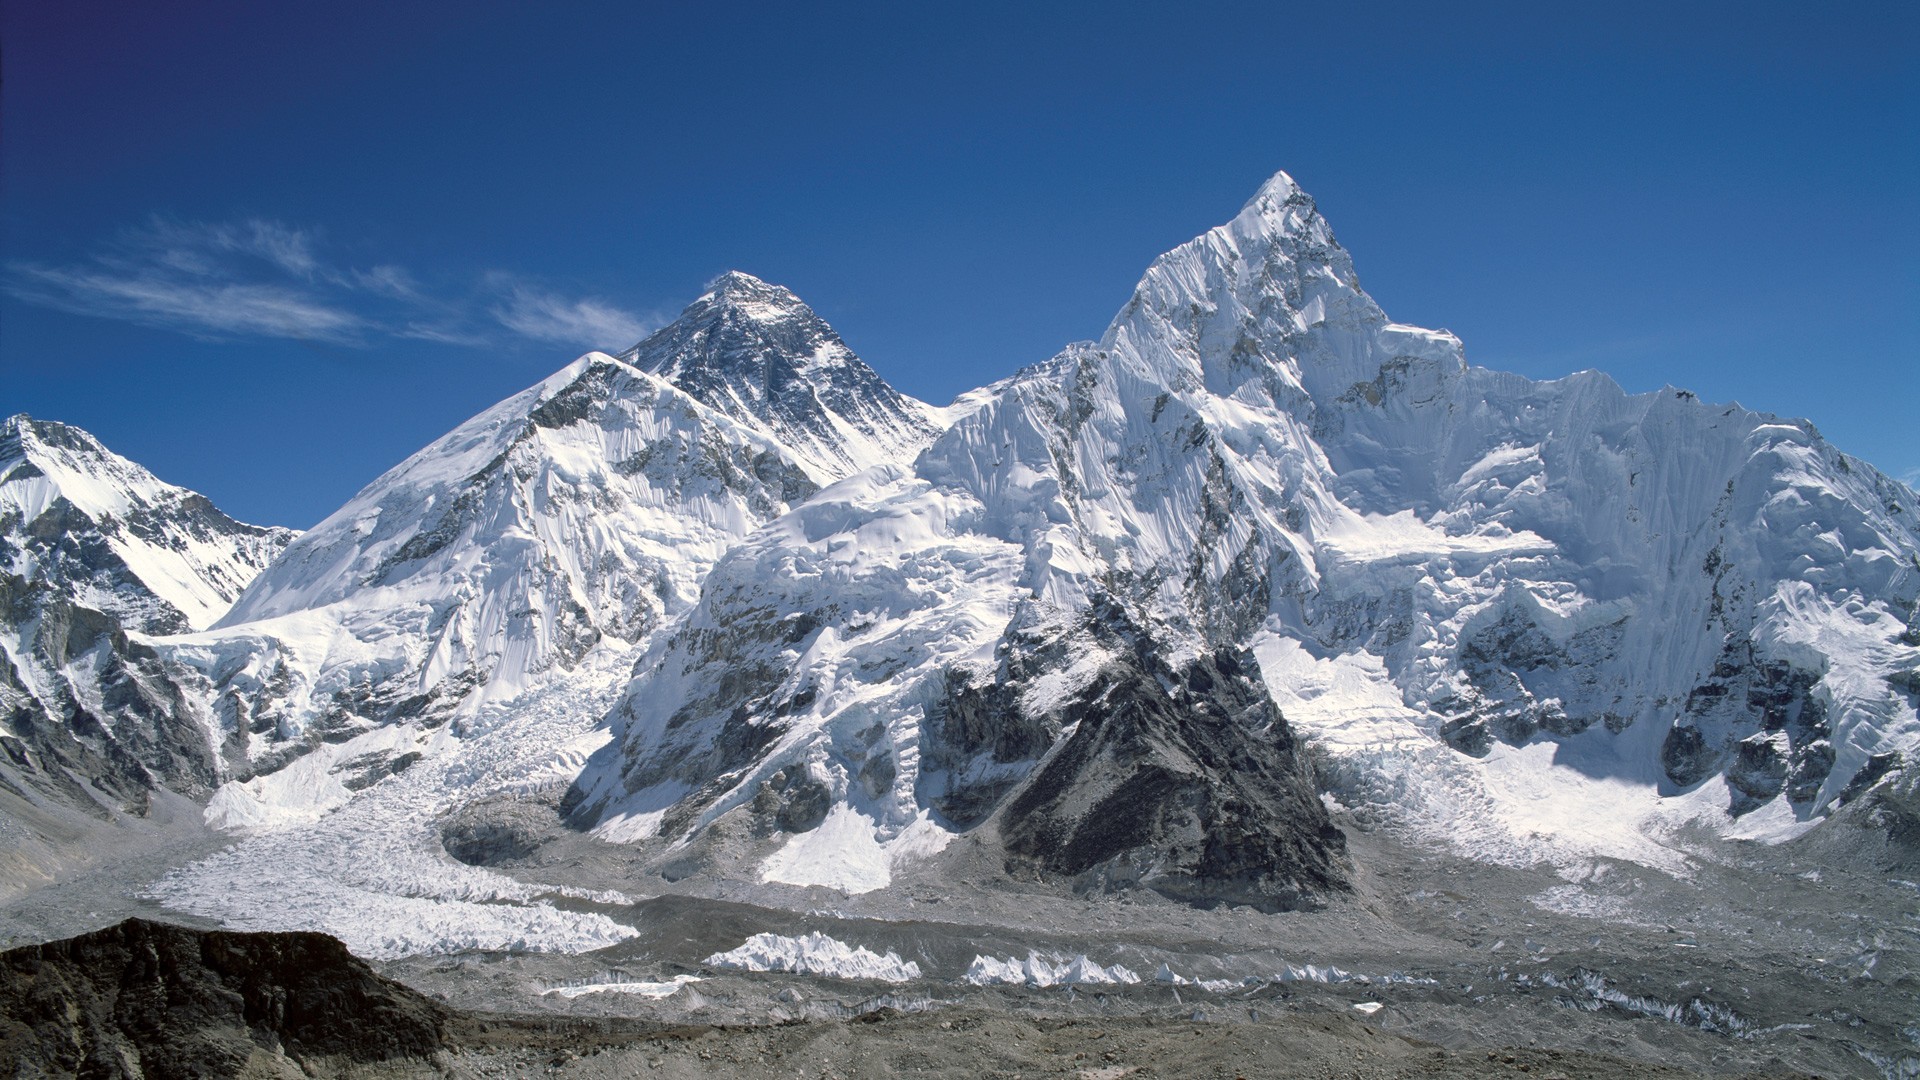 Cheap packages to Mt Everest can put lives at risk, warn mountaineers